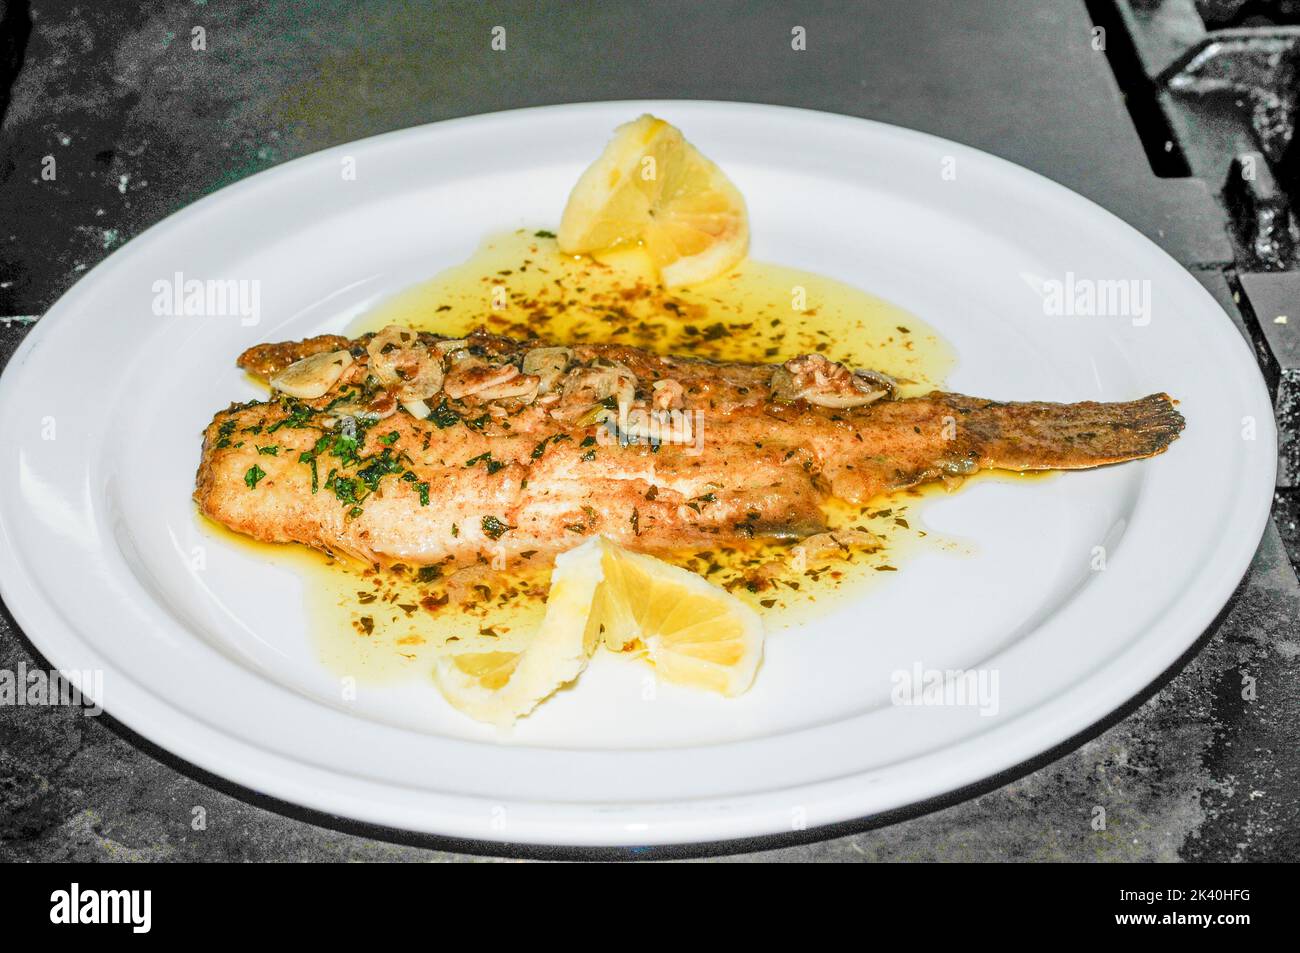 Sole meuniere with parsley and lemon Stock Photo